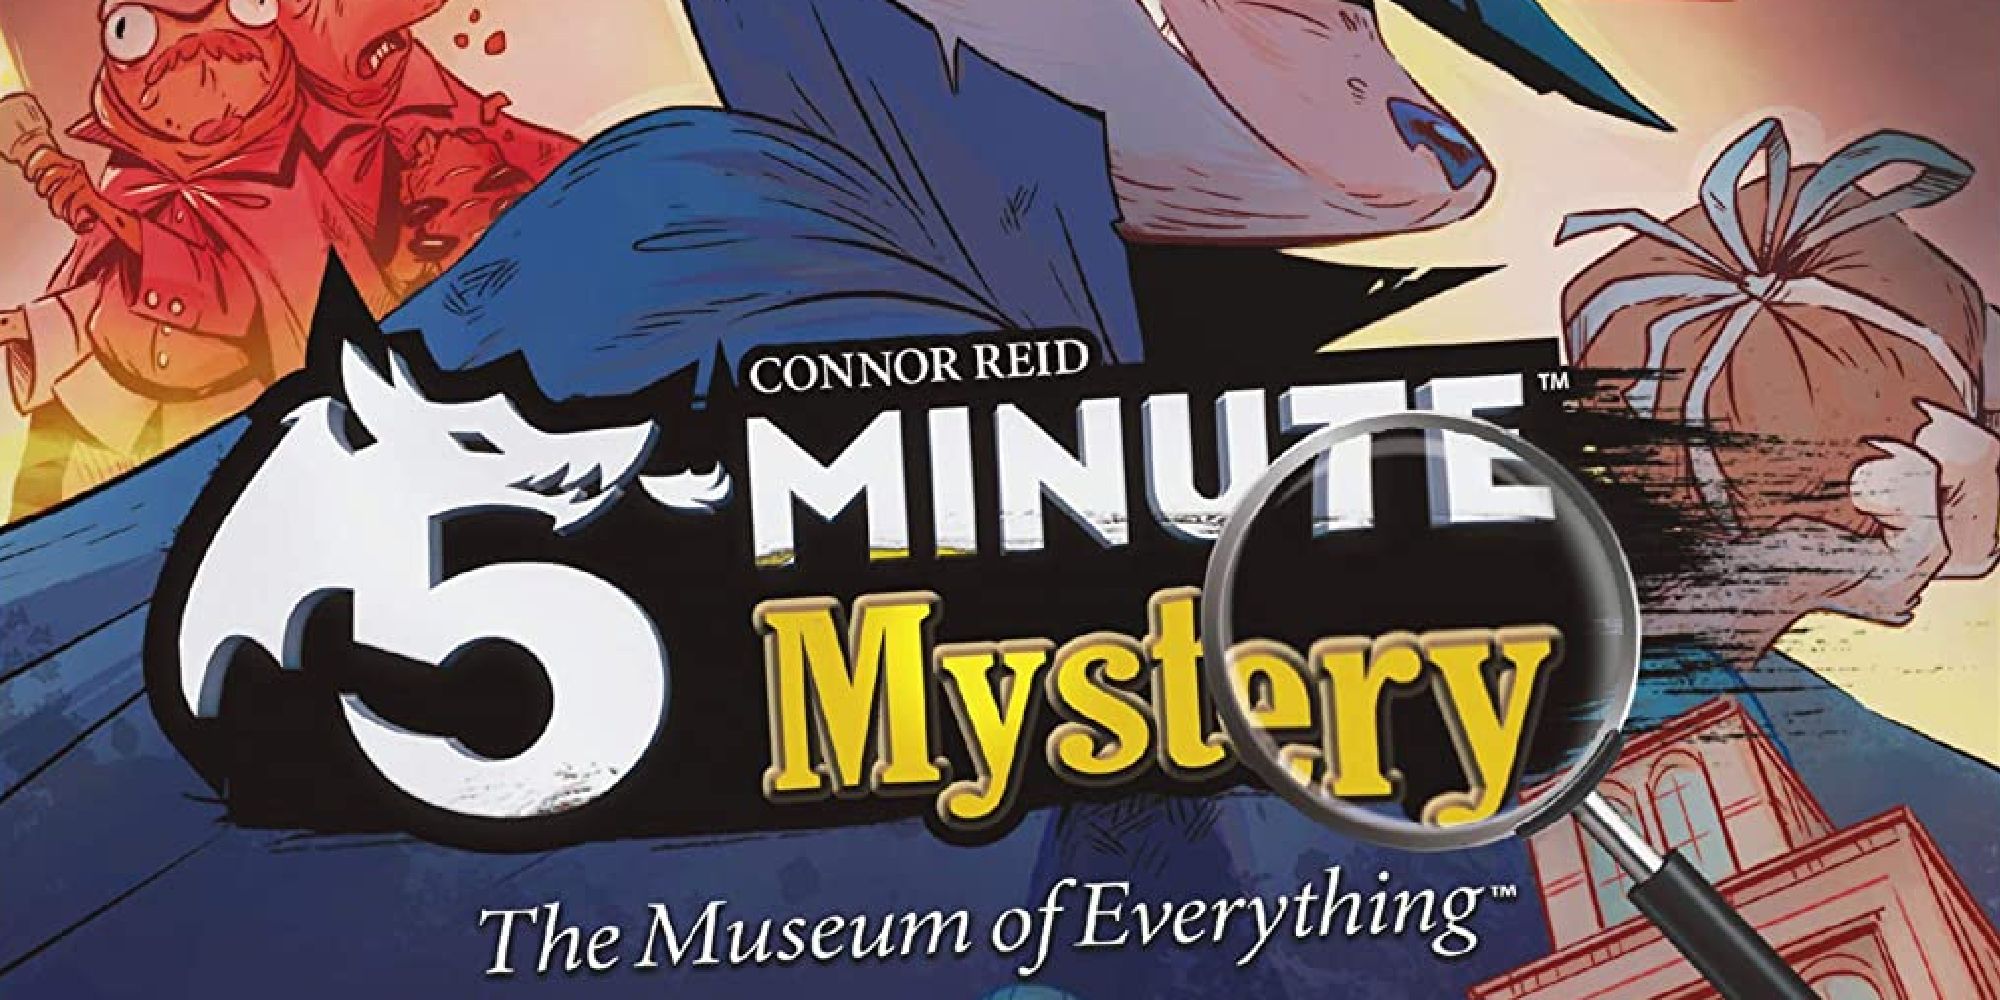 The box art for 5-Minute Mystery: The Museum of Everything, showing a sneaky fox stealing a baggie